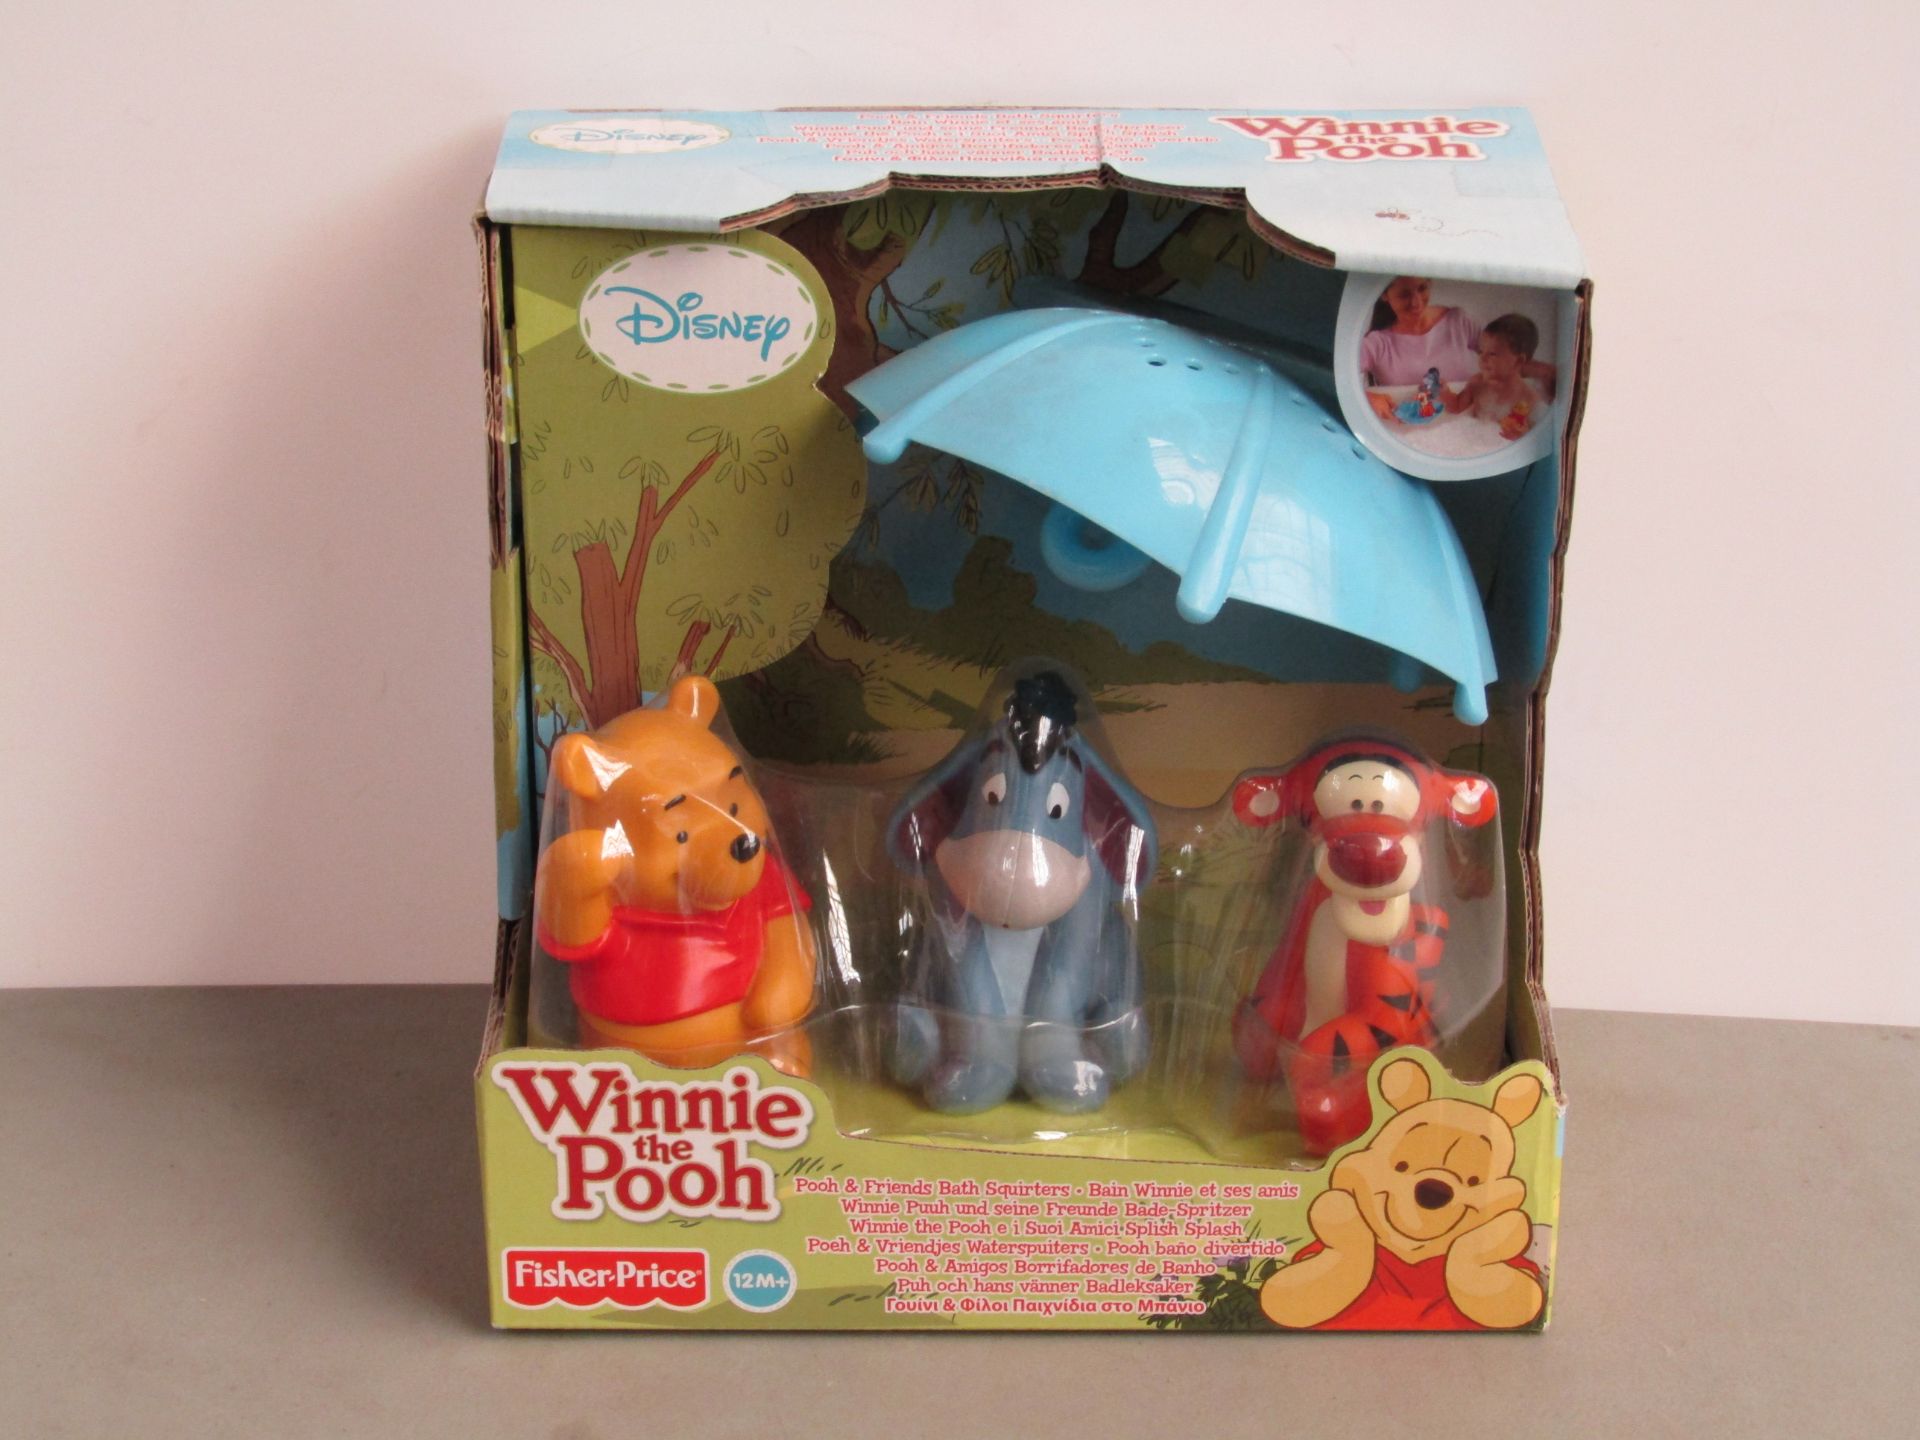 Fischer-Price Winnie the Pooh & Friends Bath Squirters. New & Boxed.